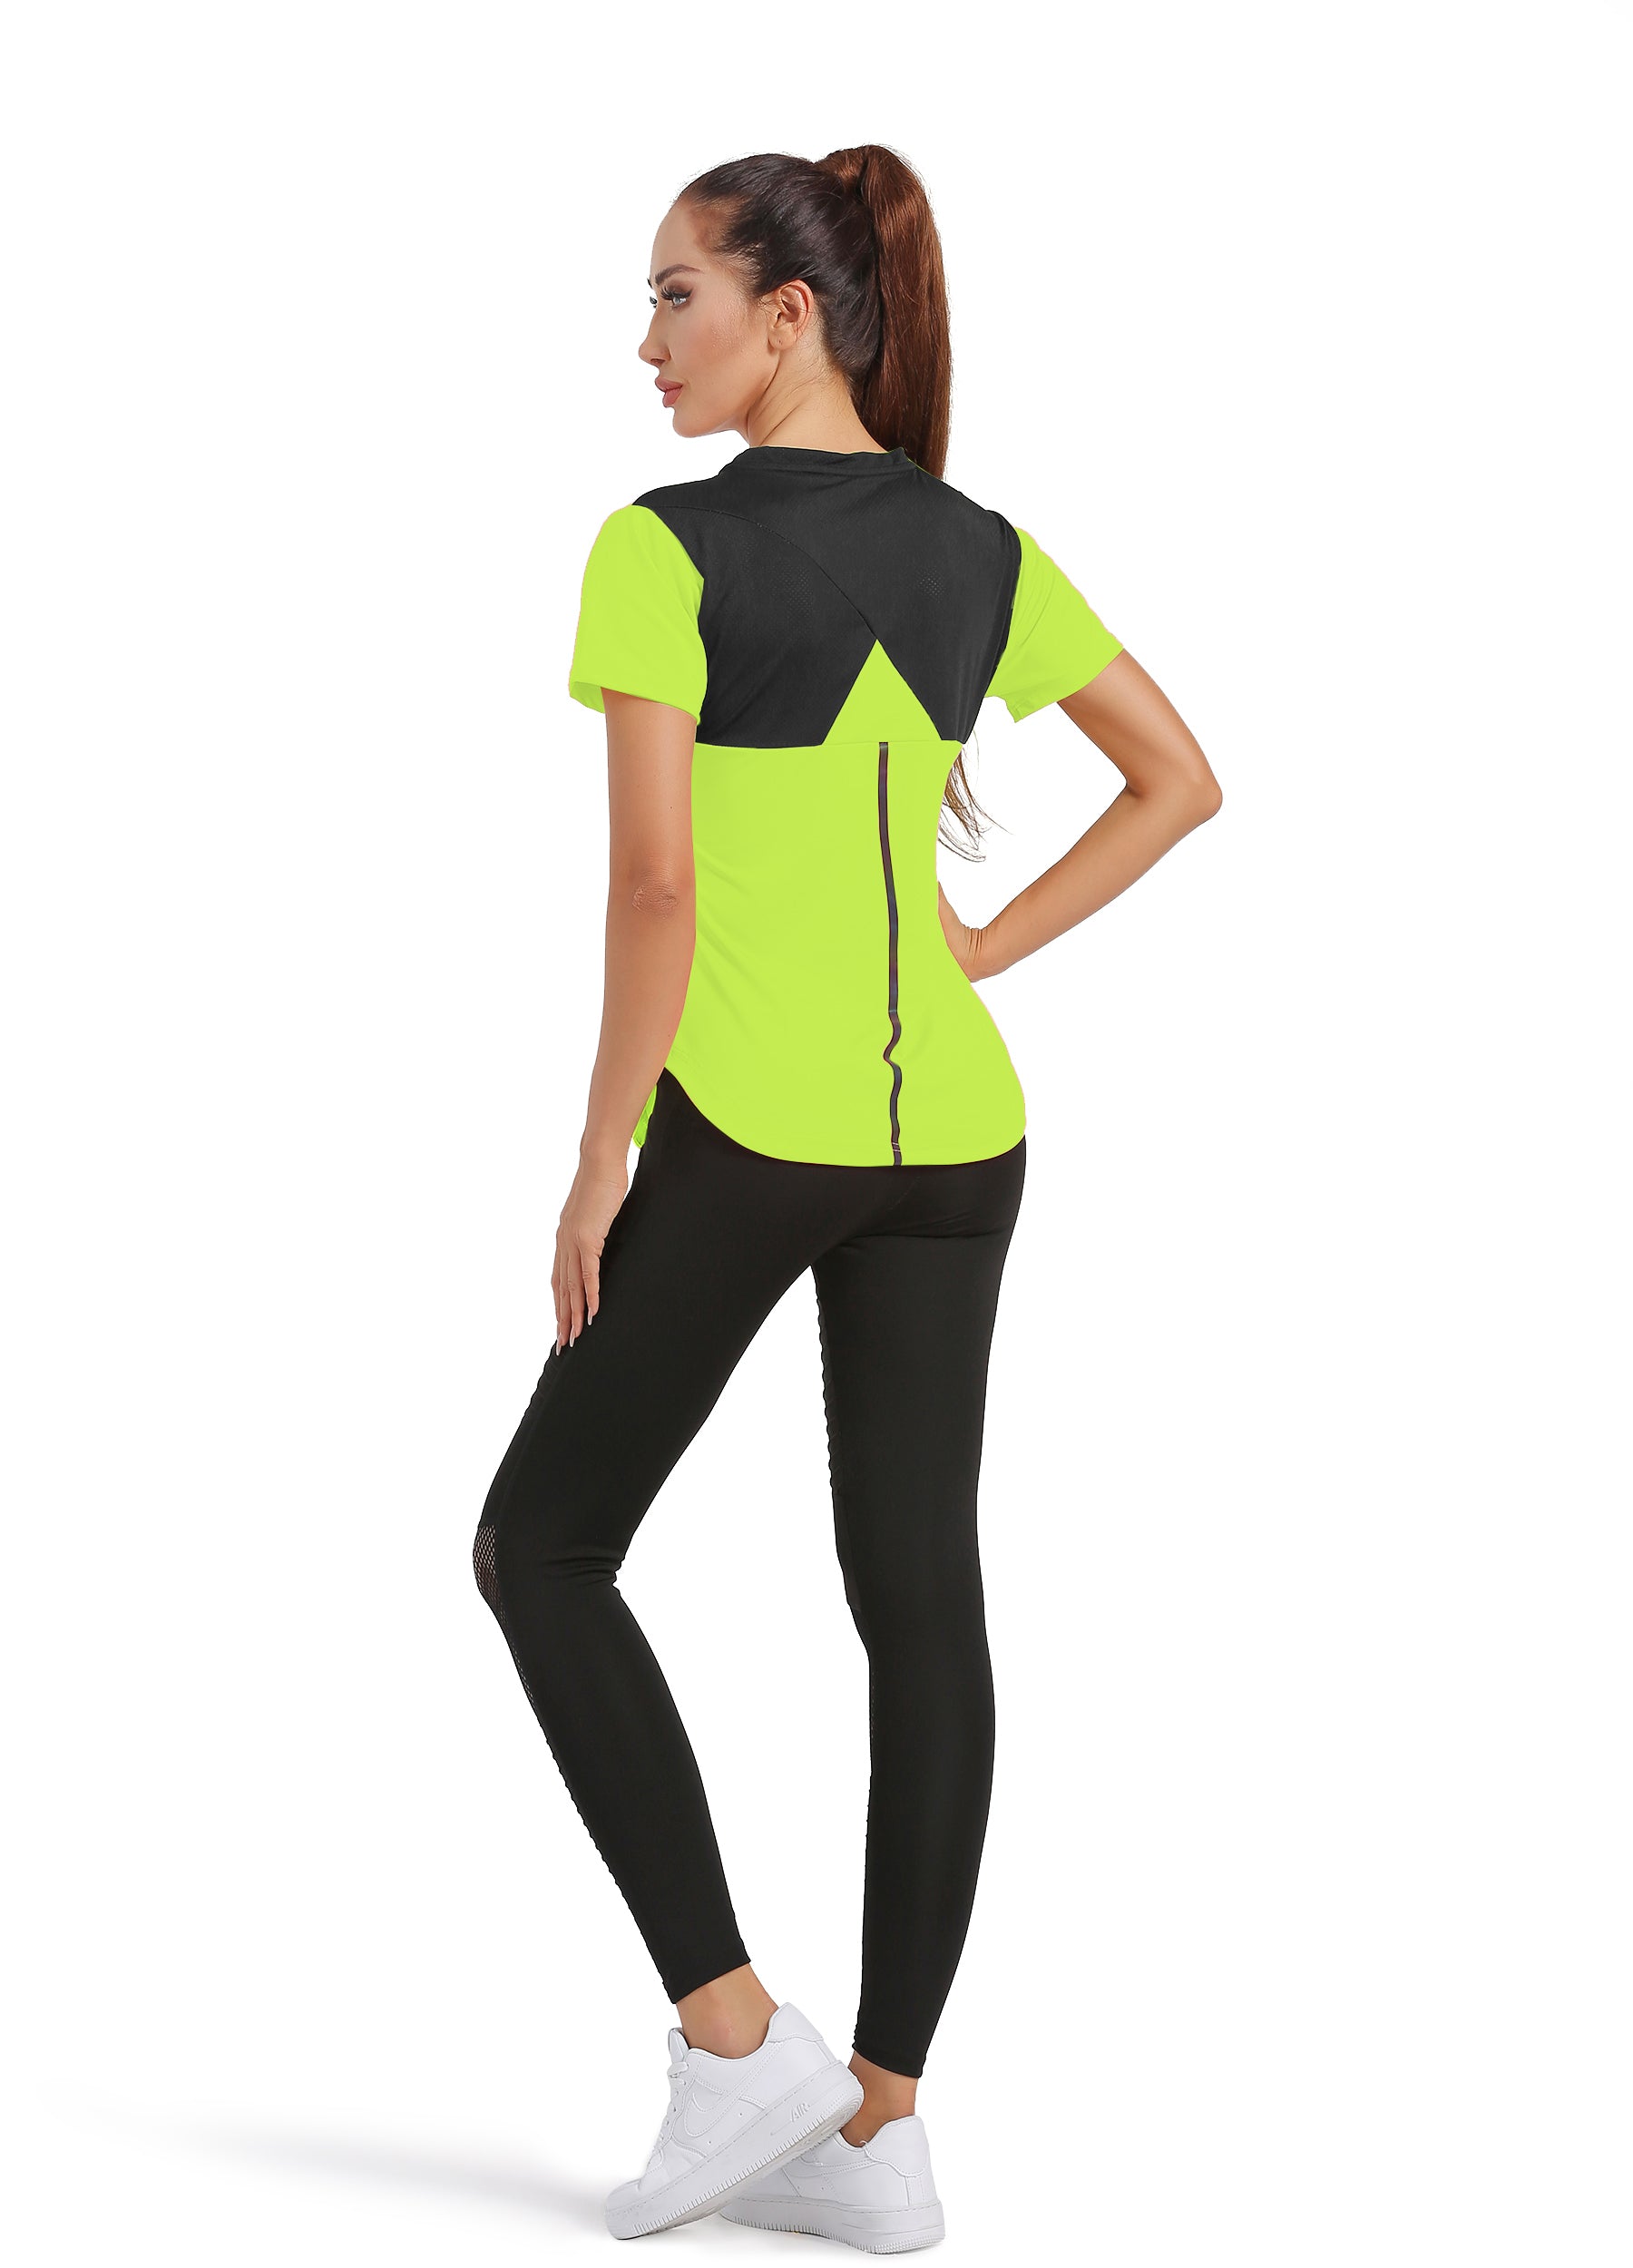 4POSE Women's Summer Round Neck Quick Dry Stretch Sport T-Shirts Green